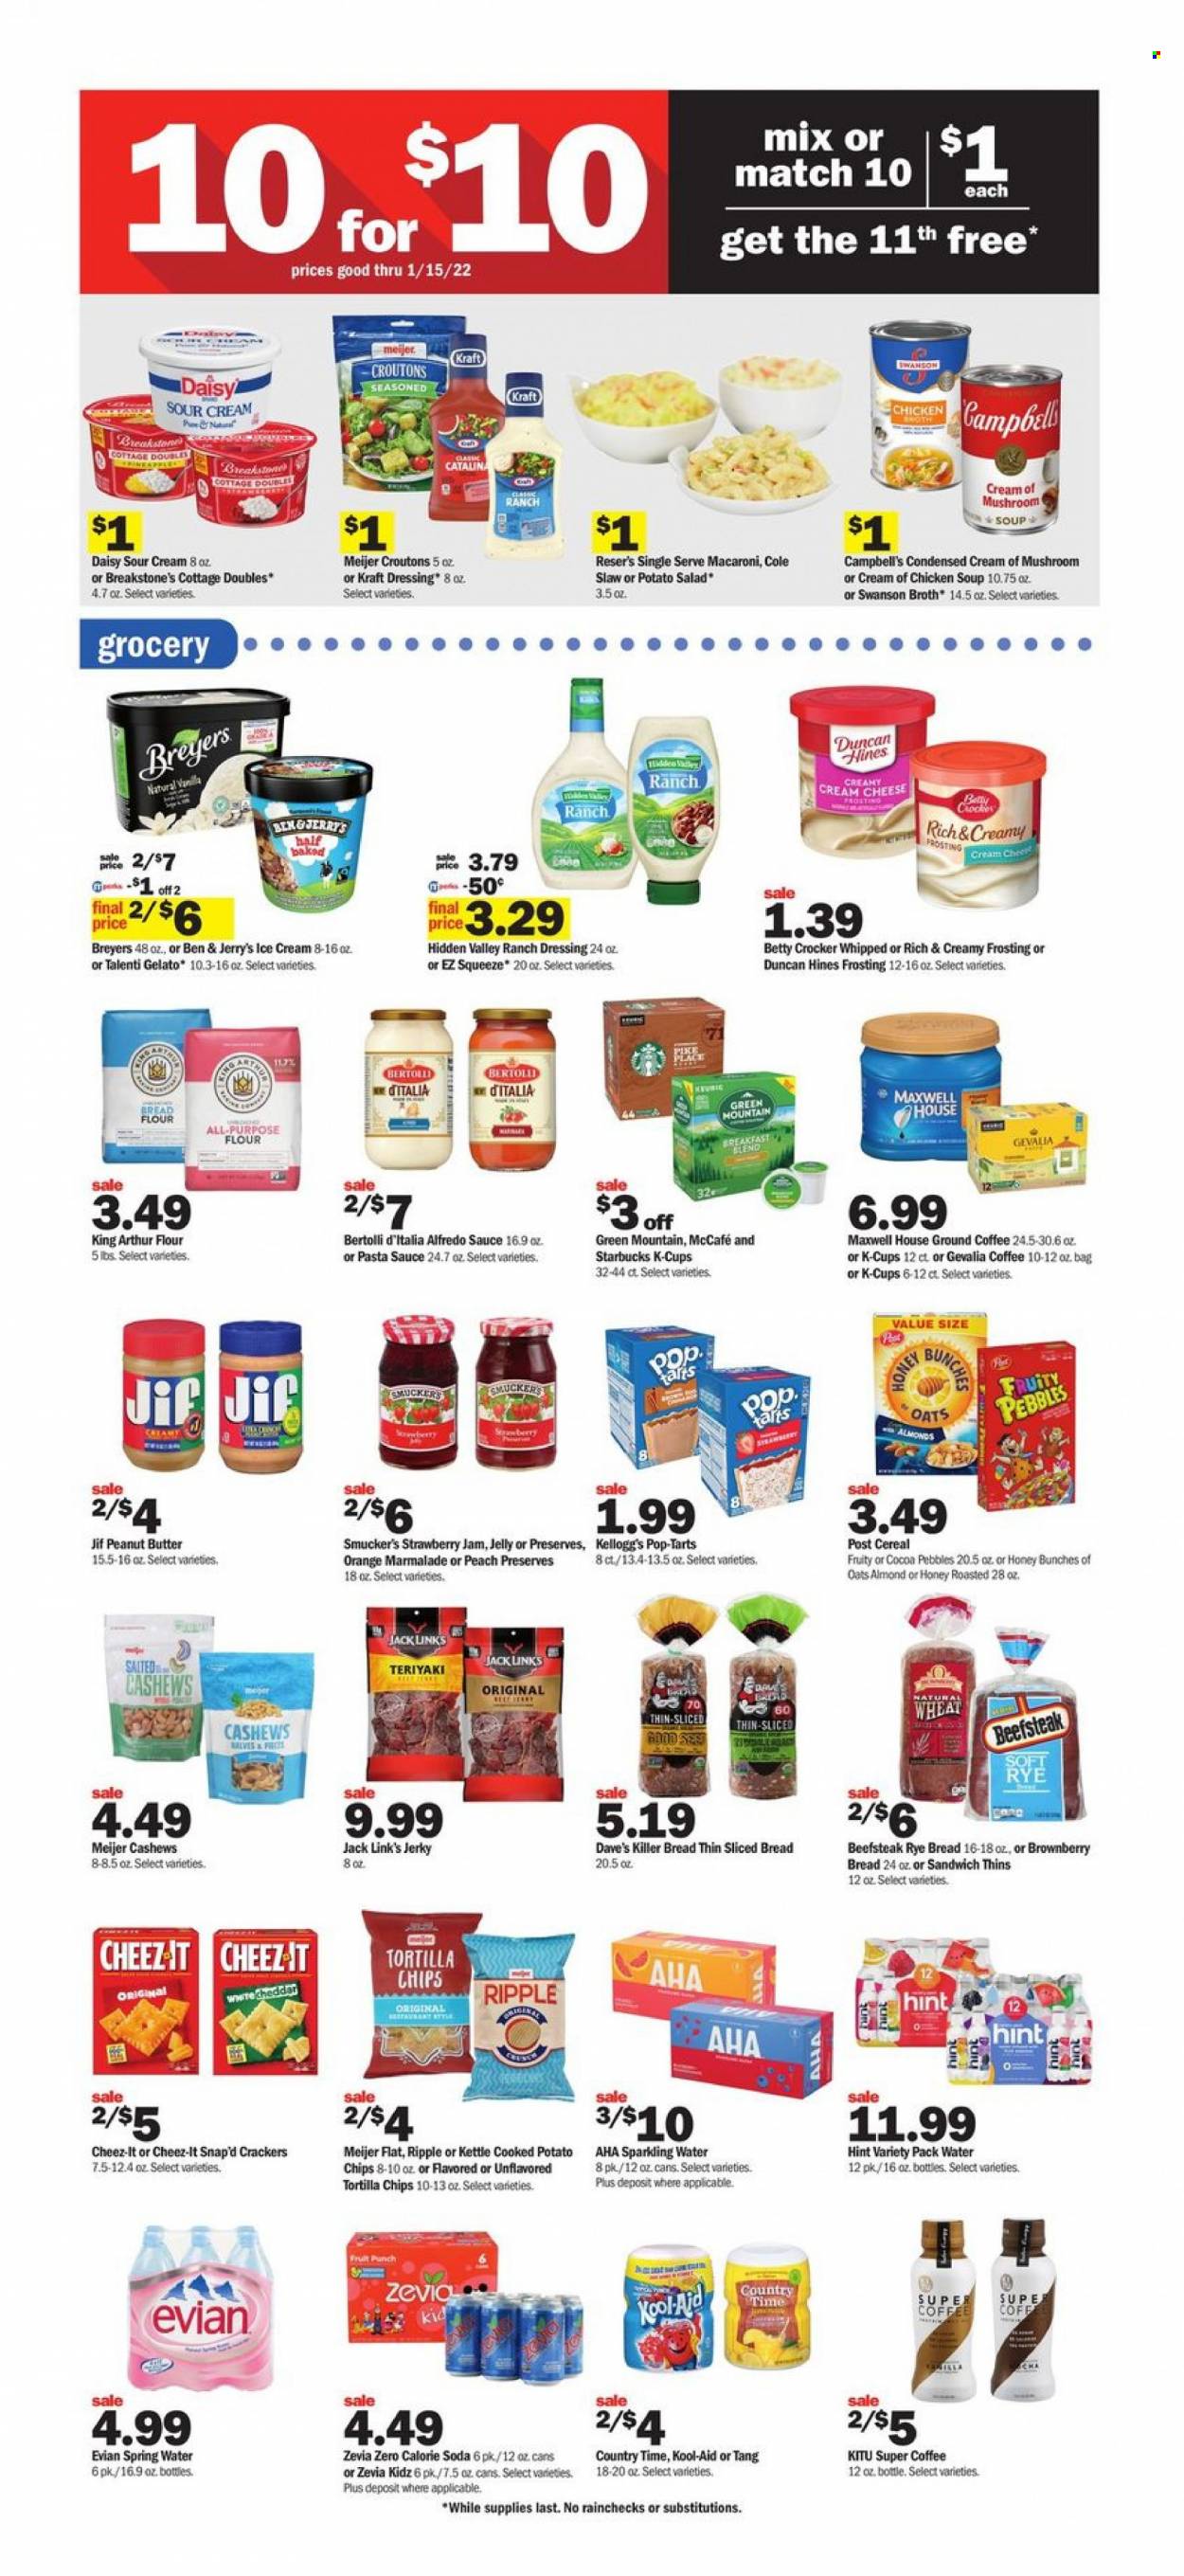 thumbnail - Meijer Flyer - 01/09/2022 - 01/15/2022 - Sales products - bread, salad, oranges, Campbell's, pasta sauce, chicken soup, sandwich, macaroni, soup, sauce, Alfredo sauce, Kraft®, Bertolli, jerky, potato salad, cream cheese, sour cream, ranch dressing, Ben & Jerry's, Talenti Gelato, gelato, jelly, crackers, Kellogg's, Pop-Tarts, tortilla chips, potato chips, chips, Thins, Cheez-It, Jack Link's, bread flour, croutons, frosting, broth, strawberry jam, cereals, Fruity Pebbles, dressing, fruit jam, peanut butter, Jif, cashews, Country Time, spring water, soda, sparkling water, Evian, Maxwell House, coffee, Starbucks, ground coffee, coffee capsules, McCafe, K-Cups, Gevalia, Green Mountain, punch. Page 7.